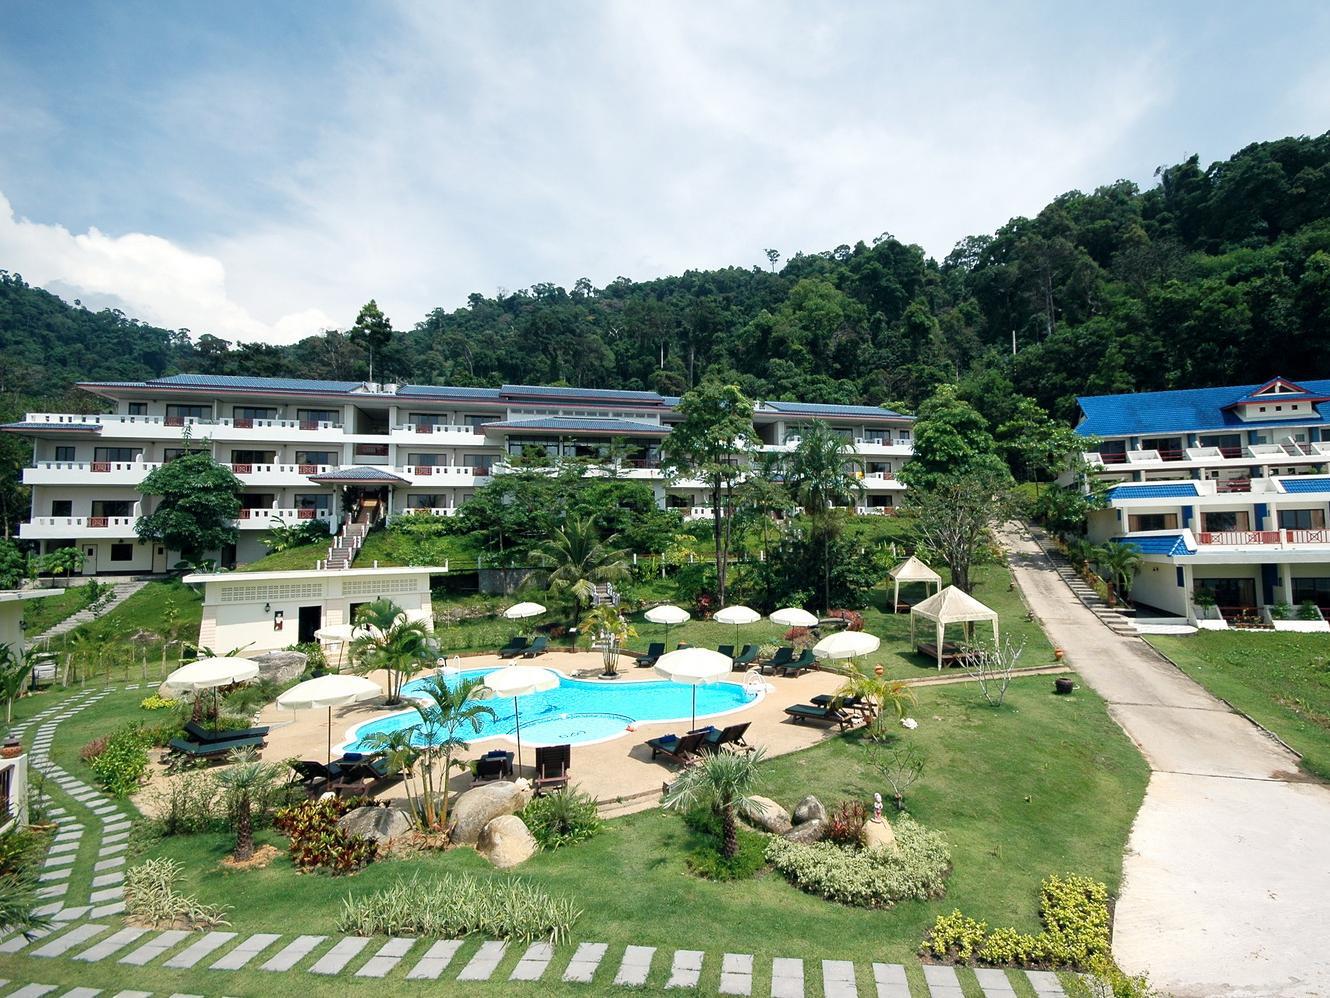 Khaolak Sunset Resort Thailand FAQ 2016, What facilities are there in Khaolak Sunset Resort Thailand 2016, What Languages Spoken are Supported in Khaolak Sunset Resort Thailand 2016, Which payment cards are accepted in Khaolak Sunset Resort Thailand , Thailand Khaolak Sunset Resort room facilities and services Q&A 2016, Thailand Khaolak Sunset Resort online booking services 2016, Thailand Khaolak Sunset Resort address 2016, Thailand Khaolak Sunset Resort telephone number 2016,Thailand Khaolak Sunset Resort map 2016, Thailand Khaolak Sunset Resort traffic guide 2016, how to go Thailand Khaolak Sunset Resort, Thailand Khaolak Sunset Resort booking online 2016, Thailand Khaolak Sunset Resort room types 2016.